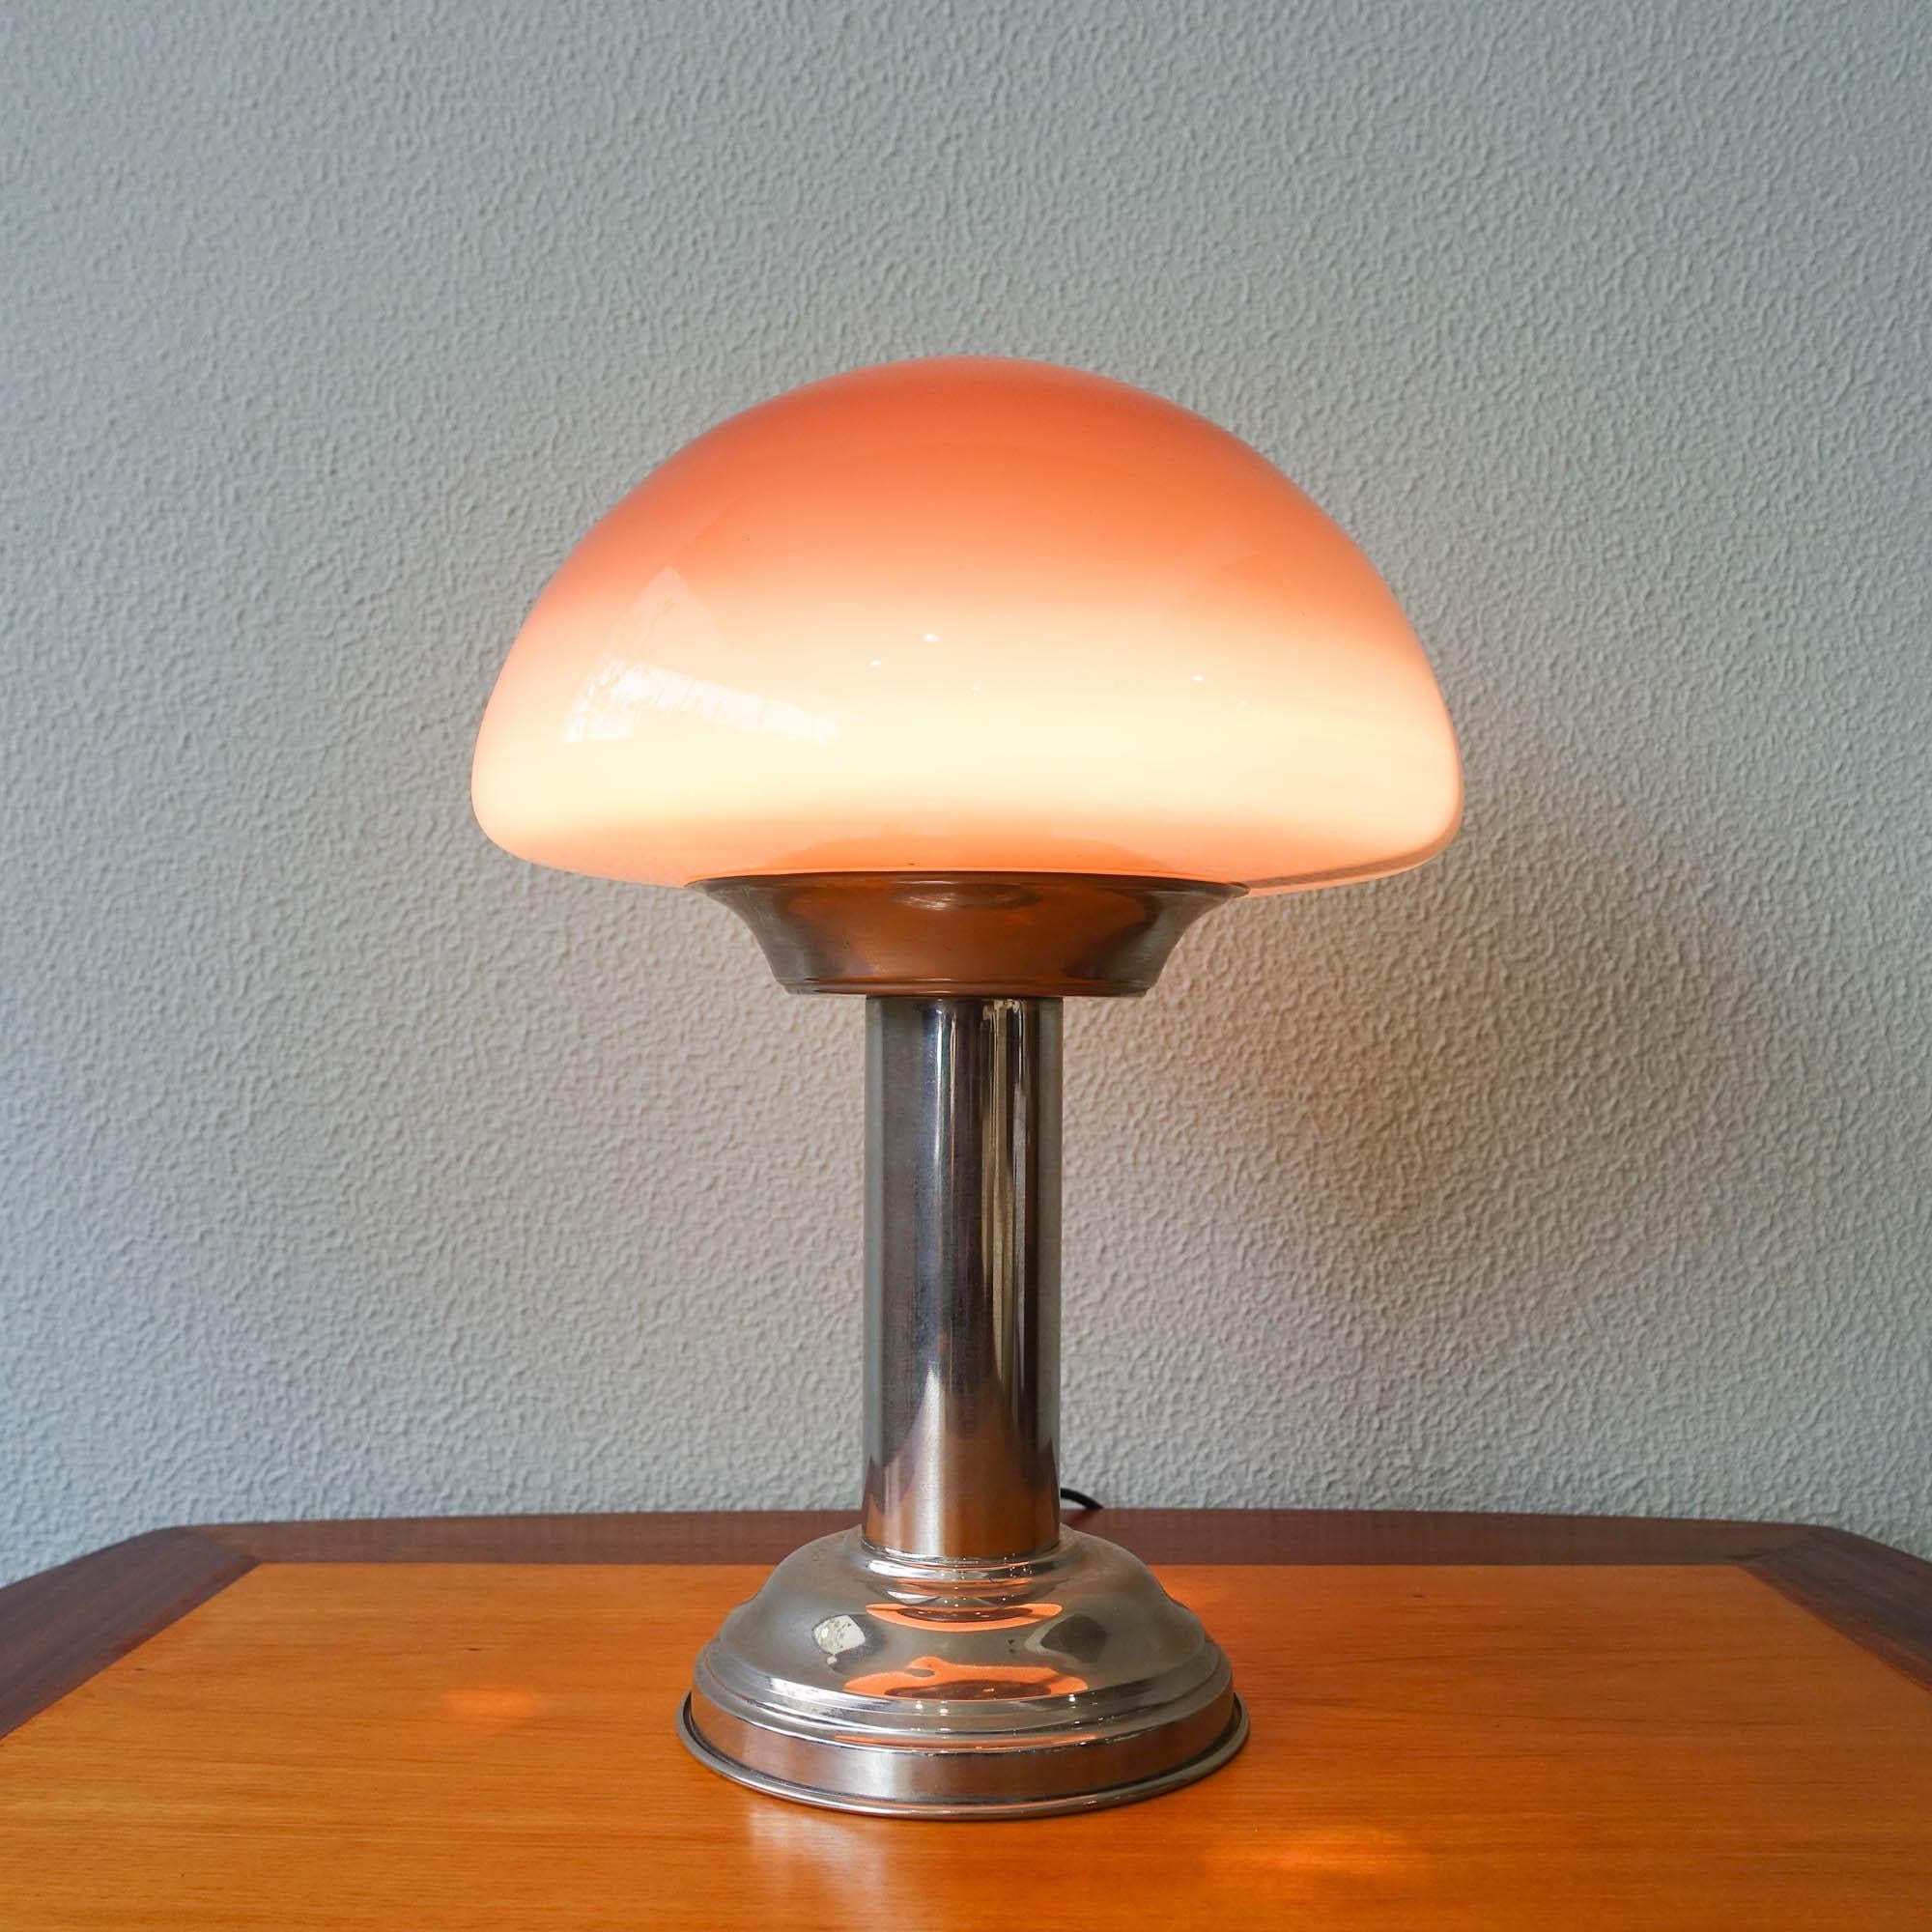 This table lamp was produced in Portugal, during the 1930's. The base is made of chrome brass in a cylindrical shape where an purple opaline mushroom shaped glass shade is set. It is in the original and good condition.